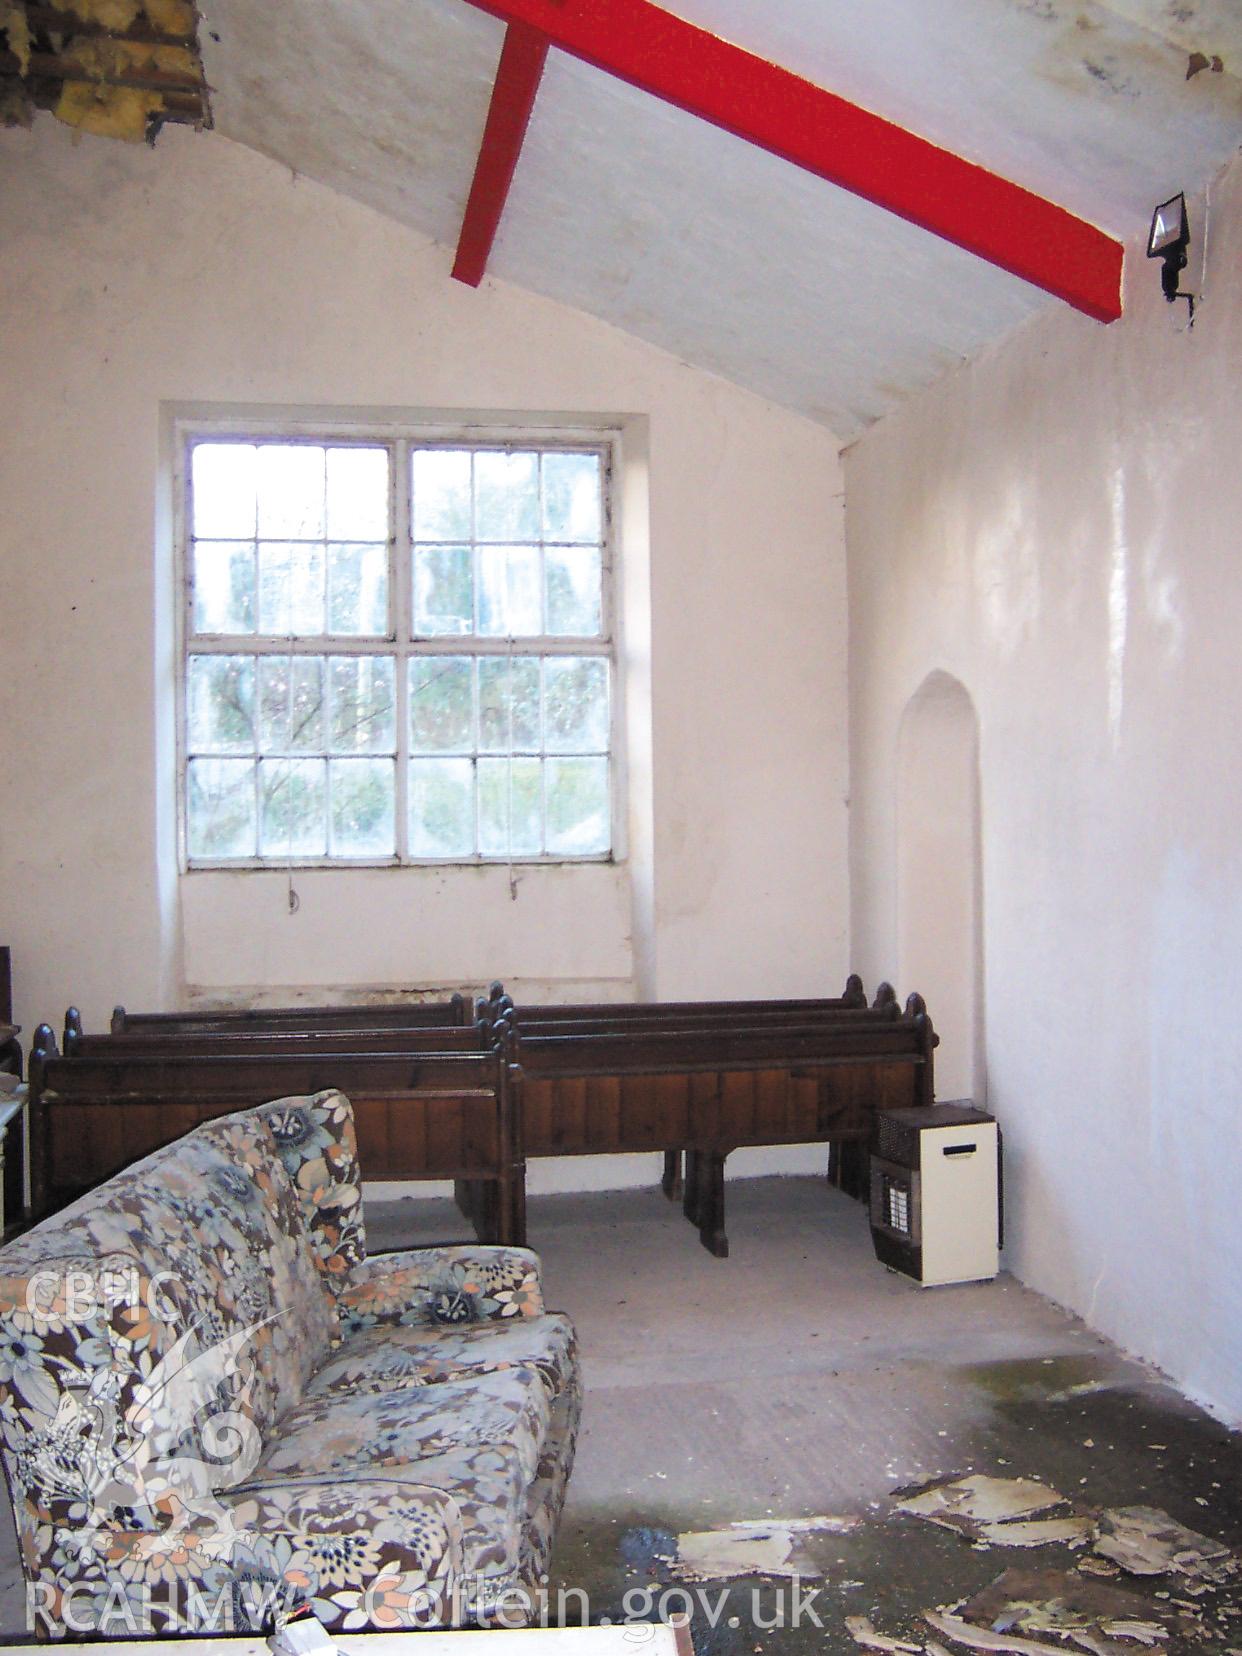 Colour digital photograph of the former school room.